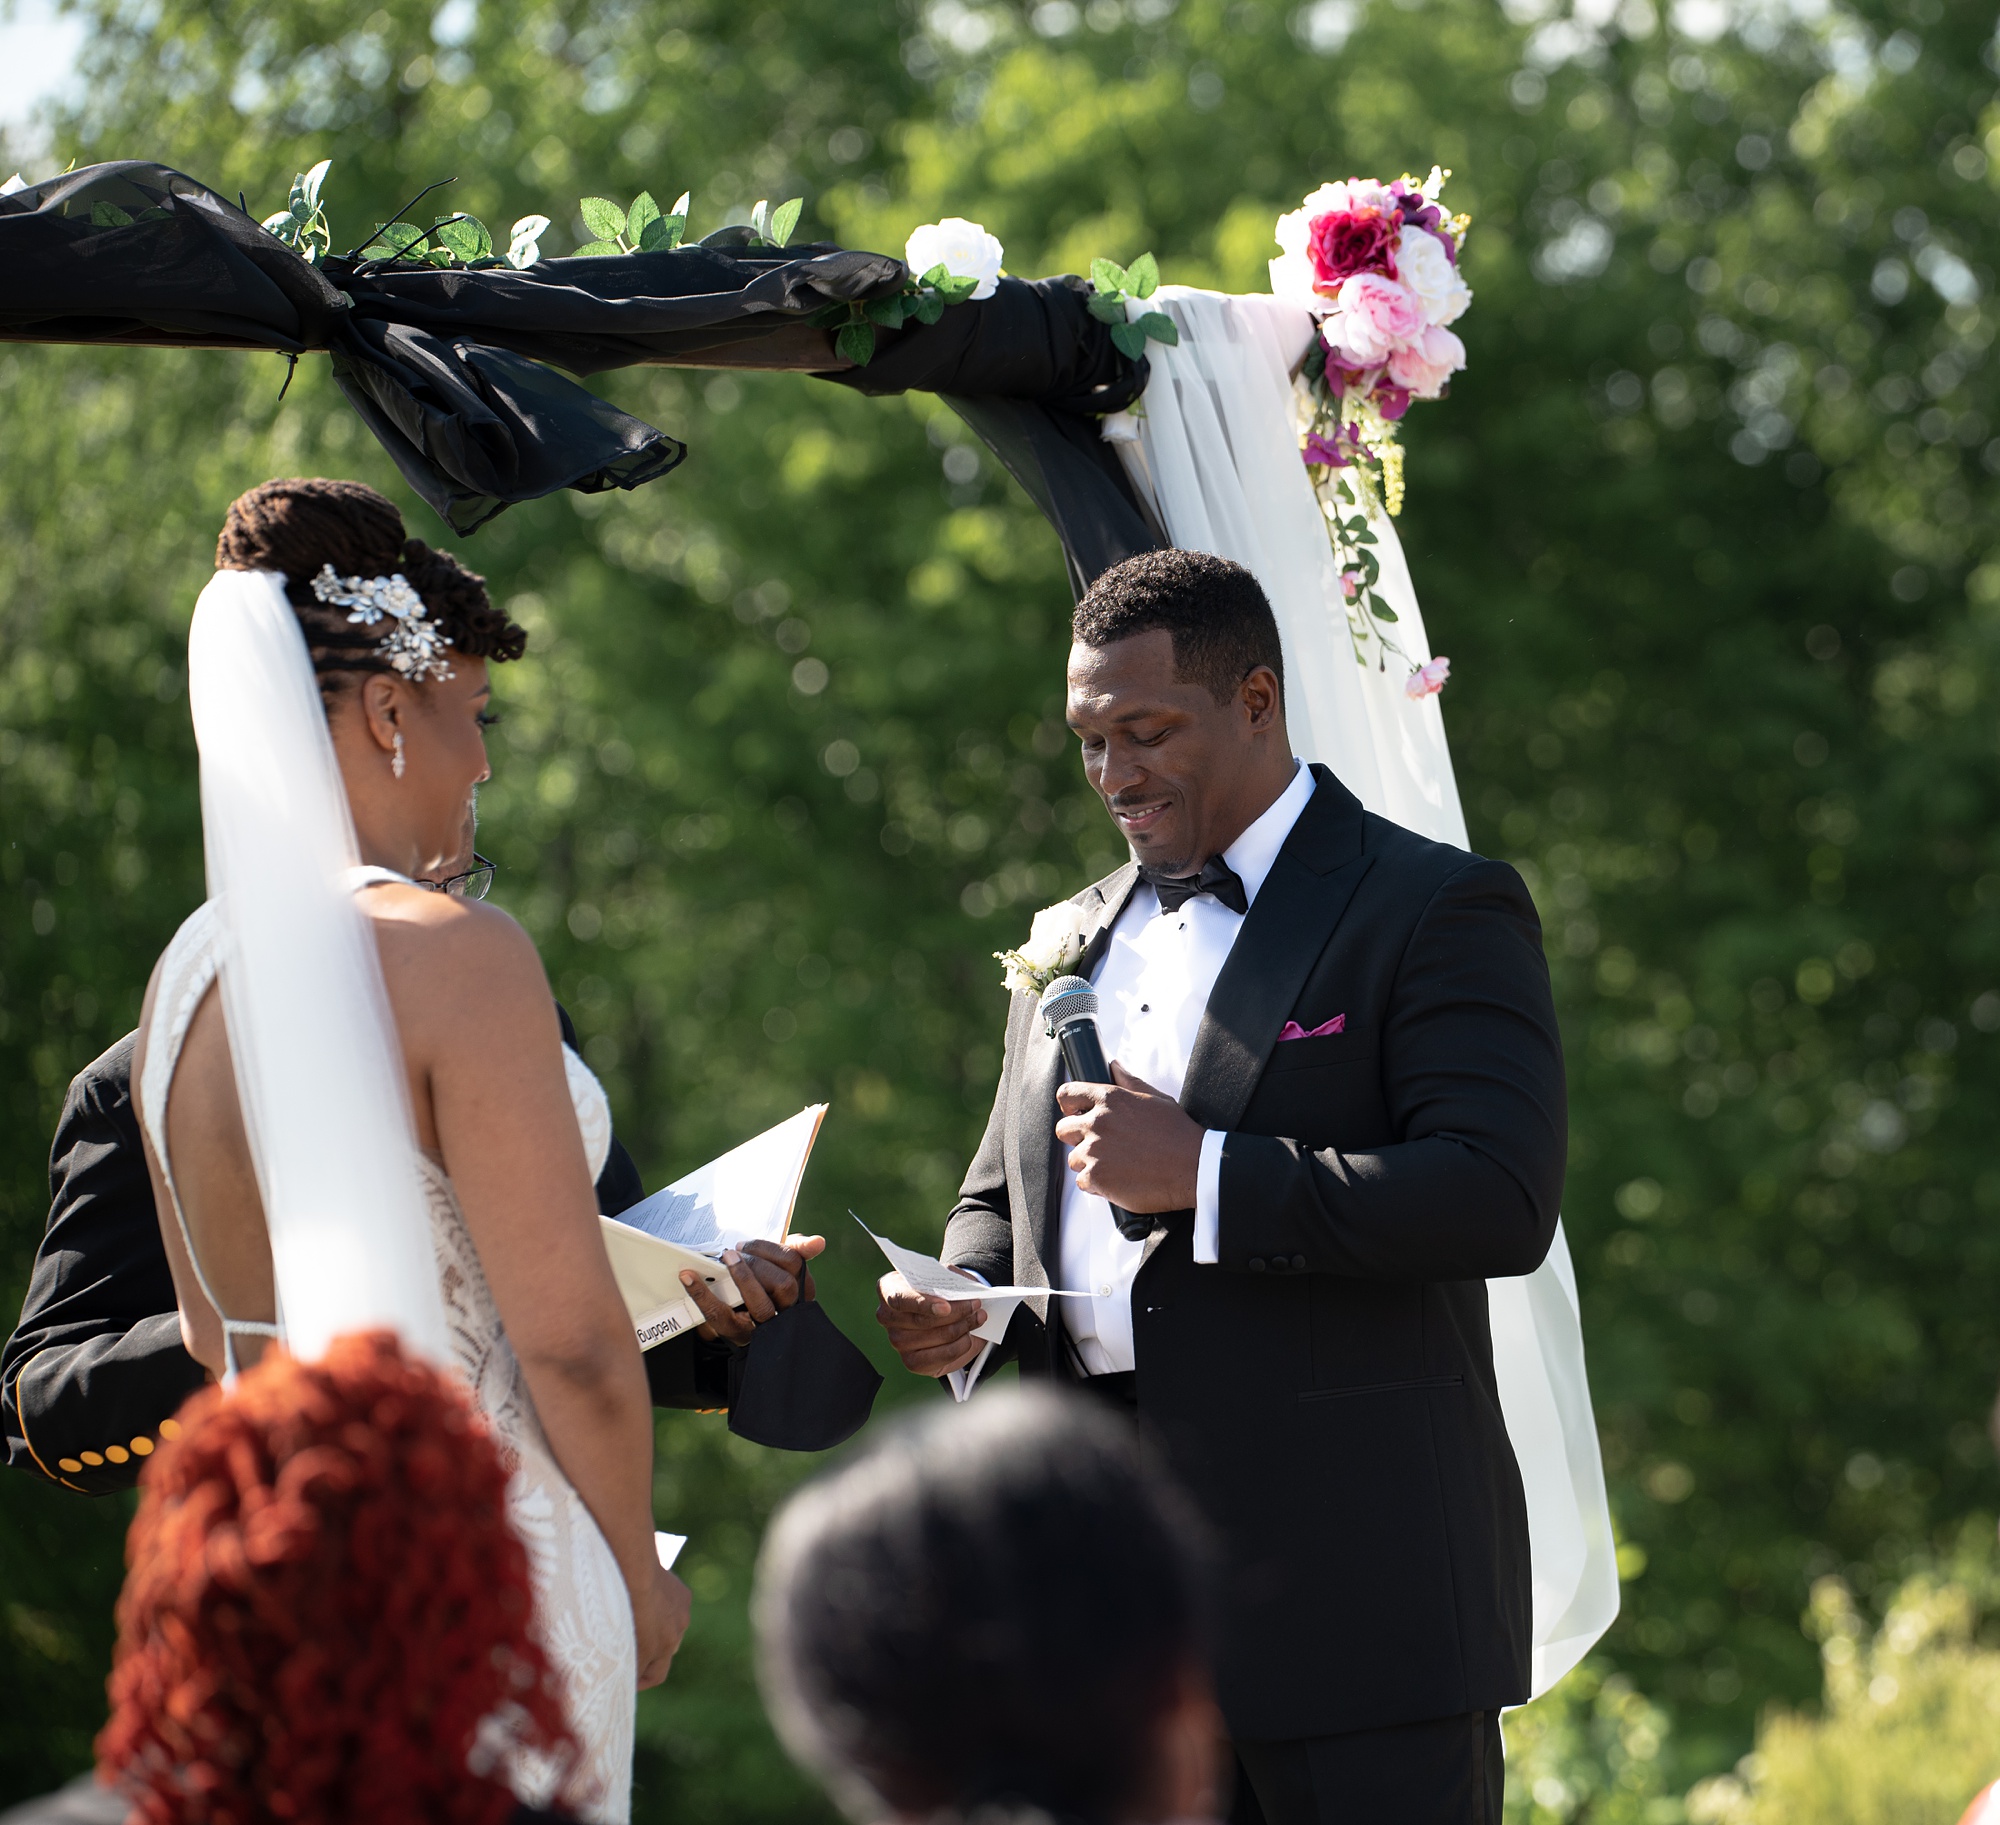 bride reads vows to groom during wedding ceremony